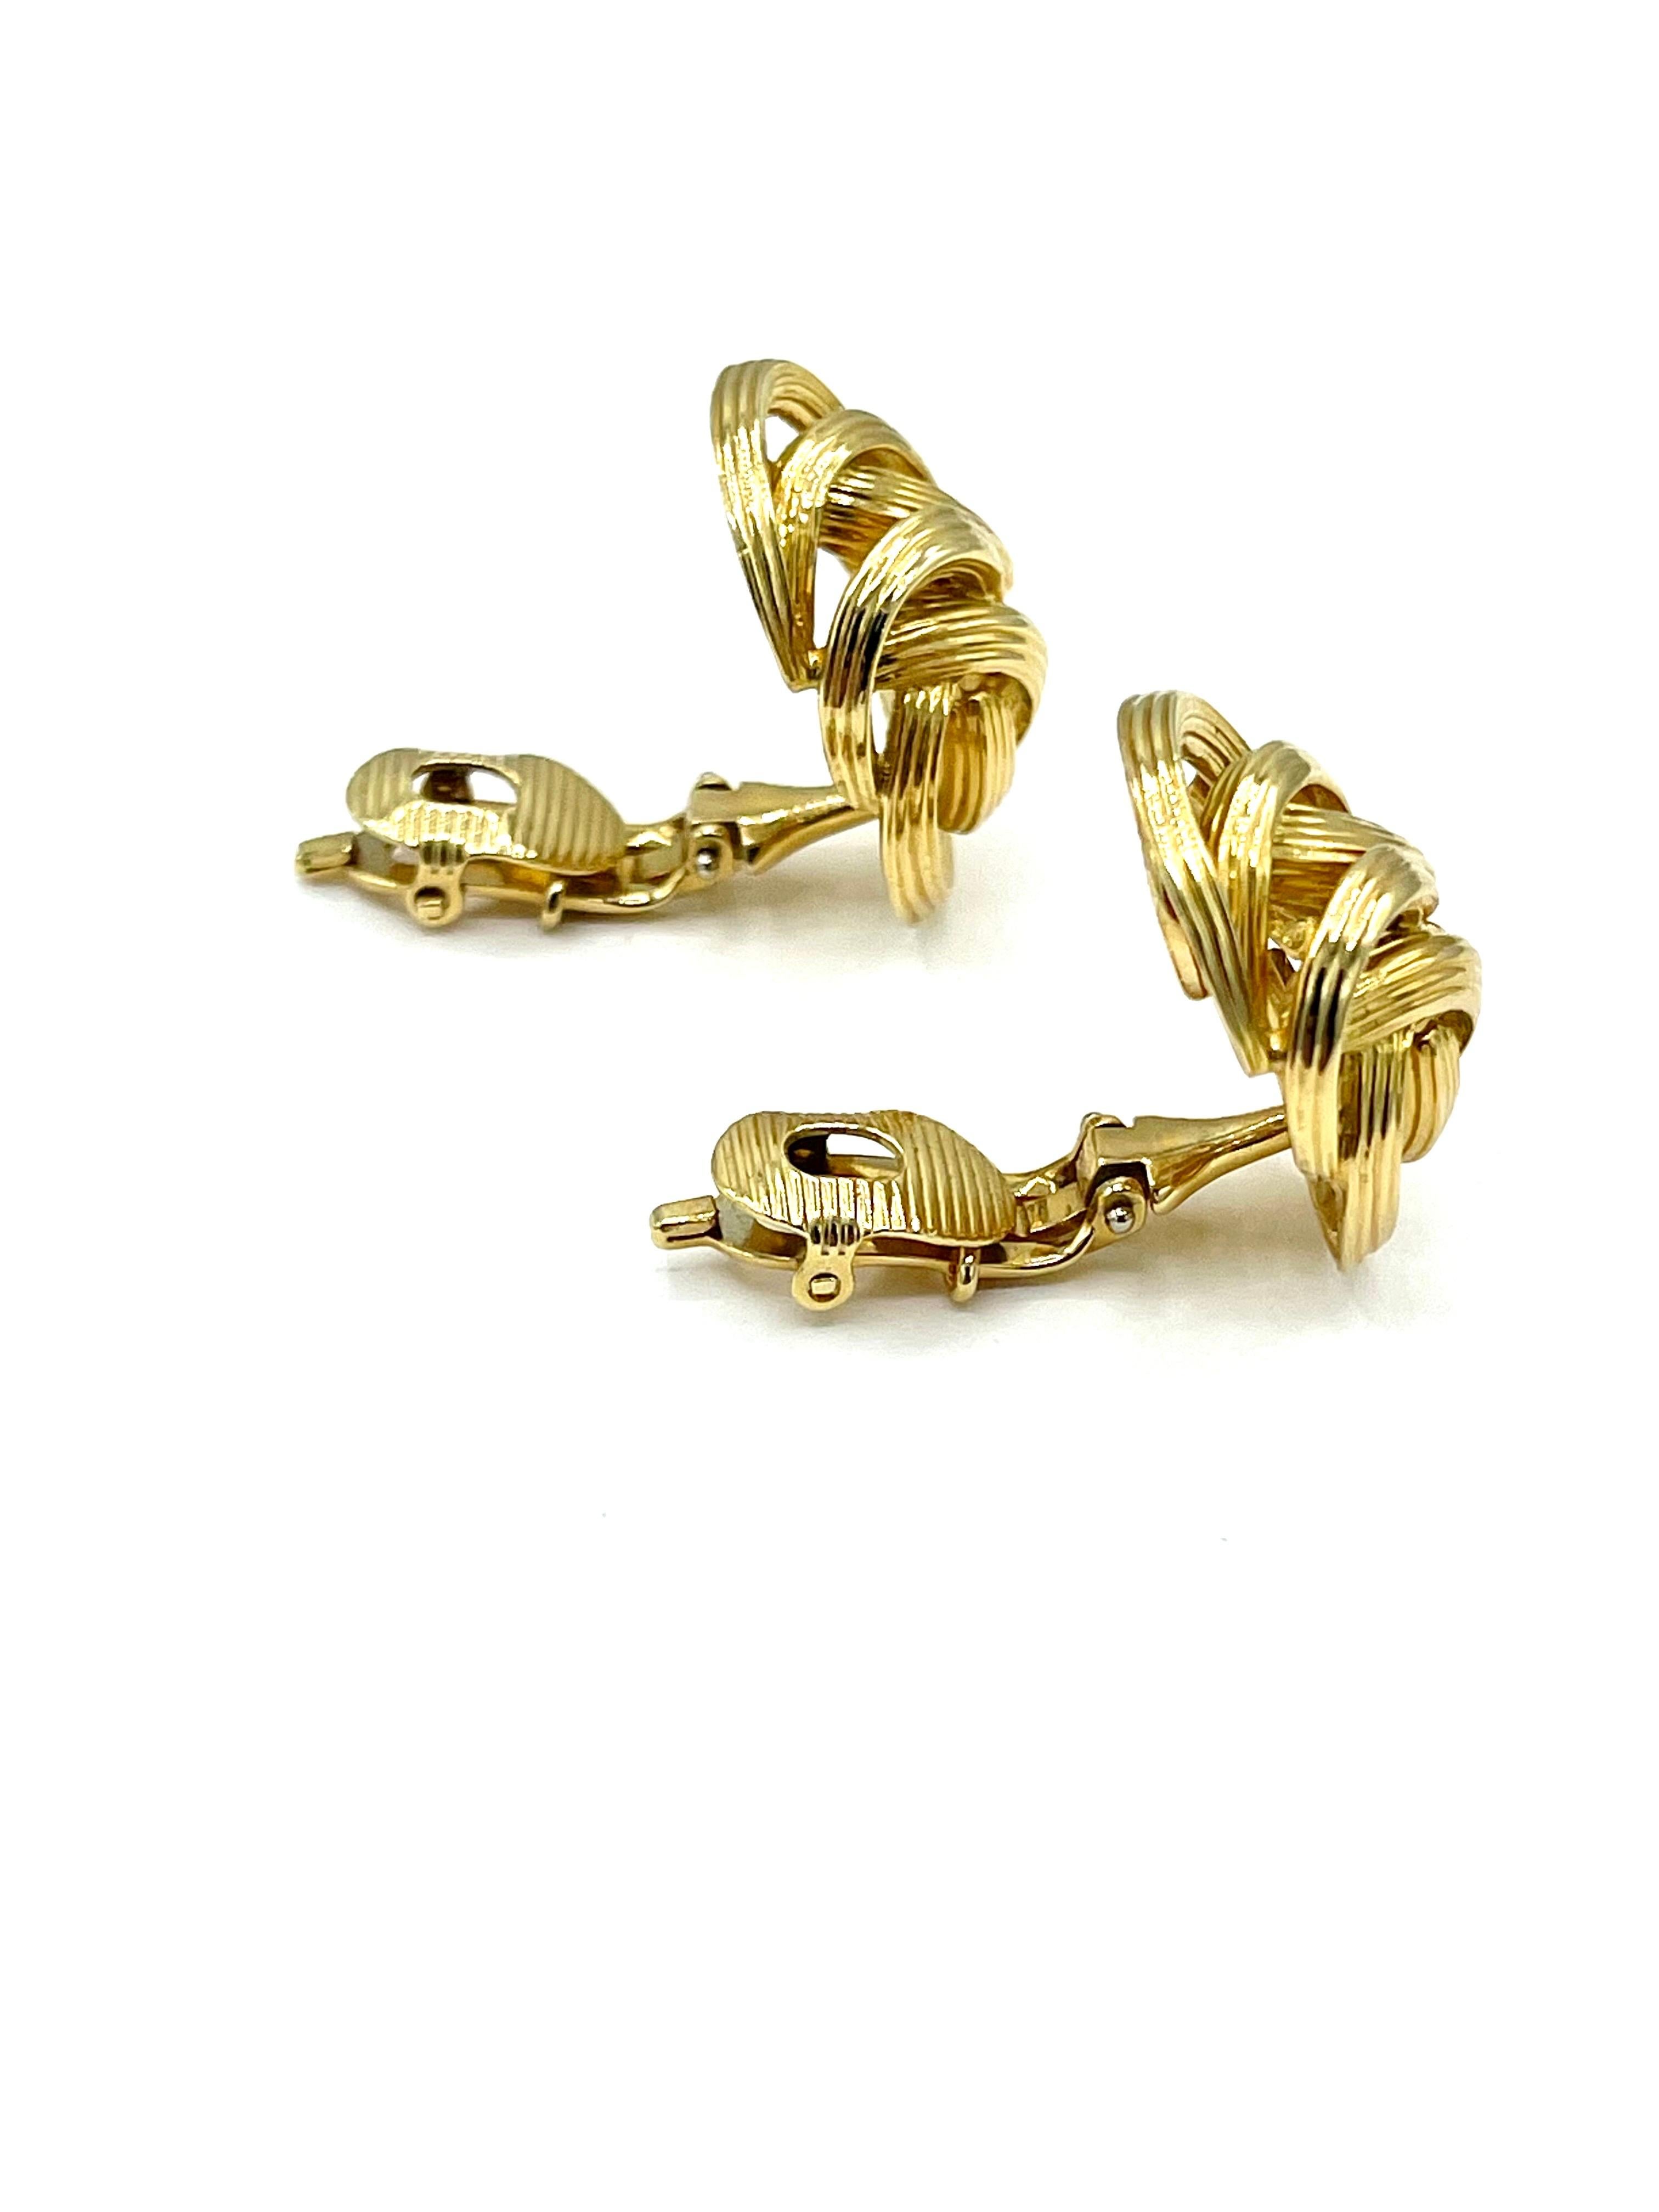 A great pair of Tiffany & Co. earrings!  These 18k yellow gold oval knot earrings are designed with textured gold and a leaver back clip.  They are signed 